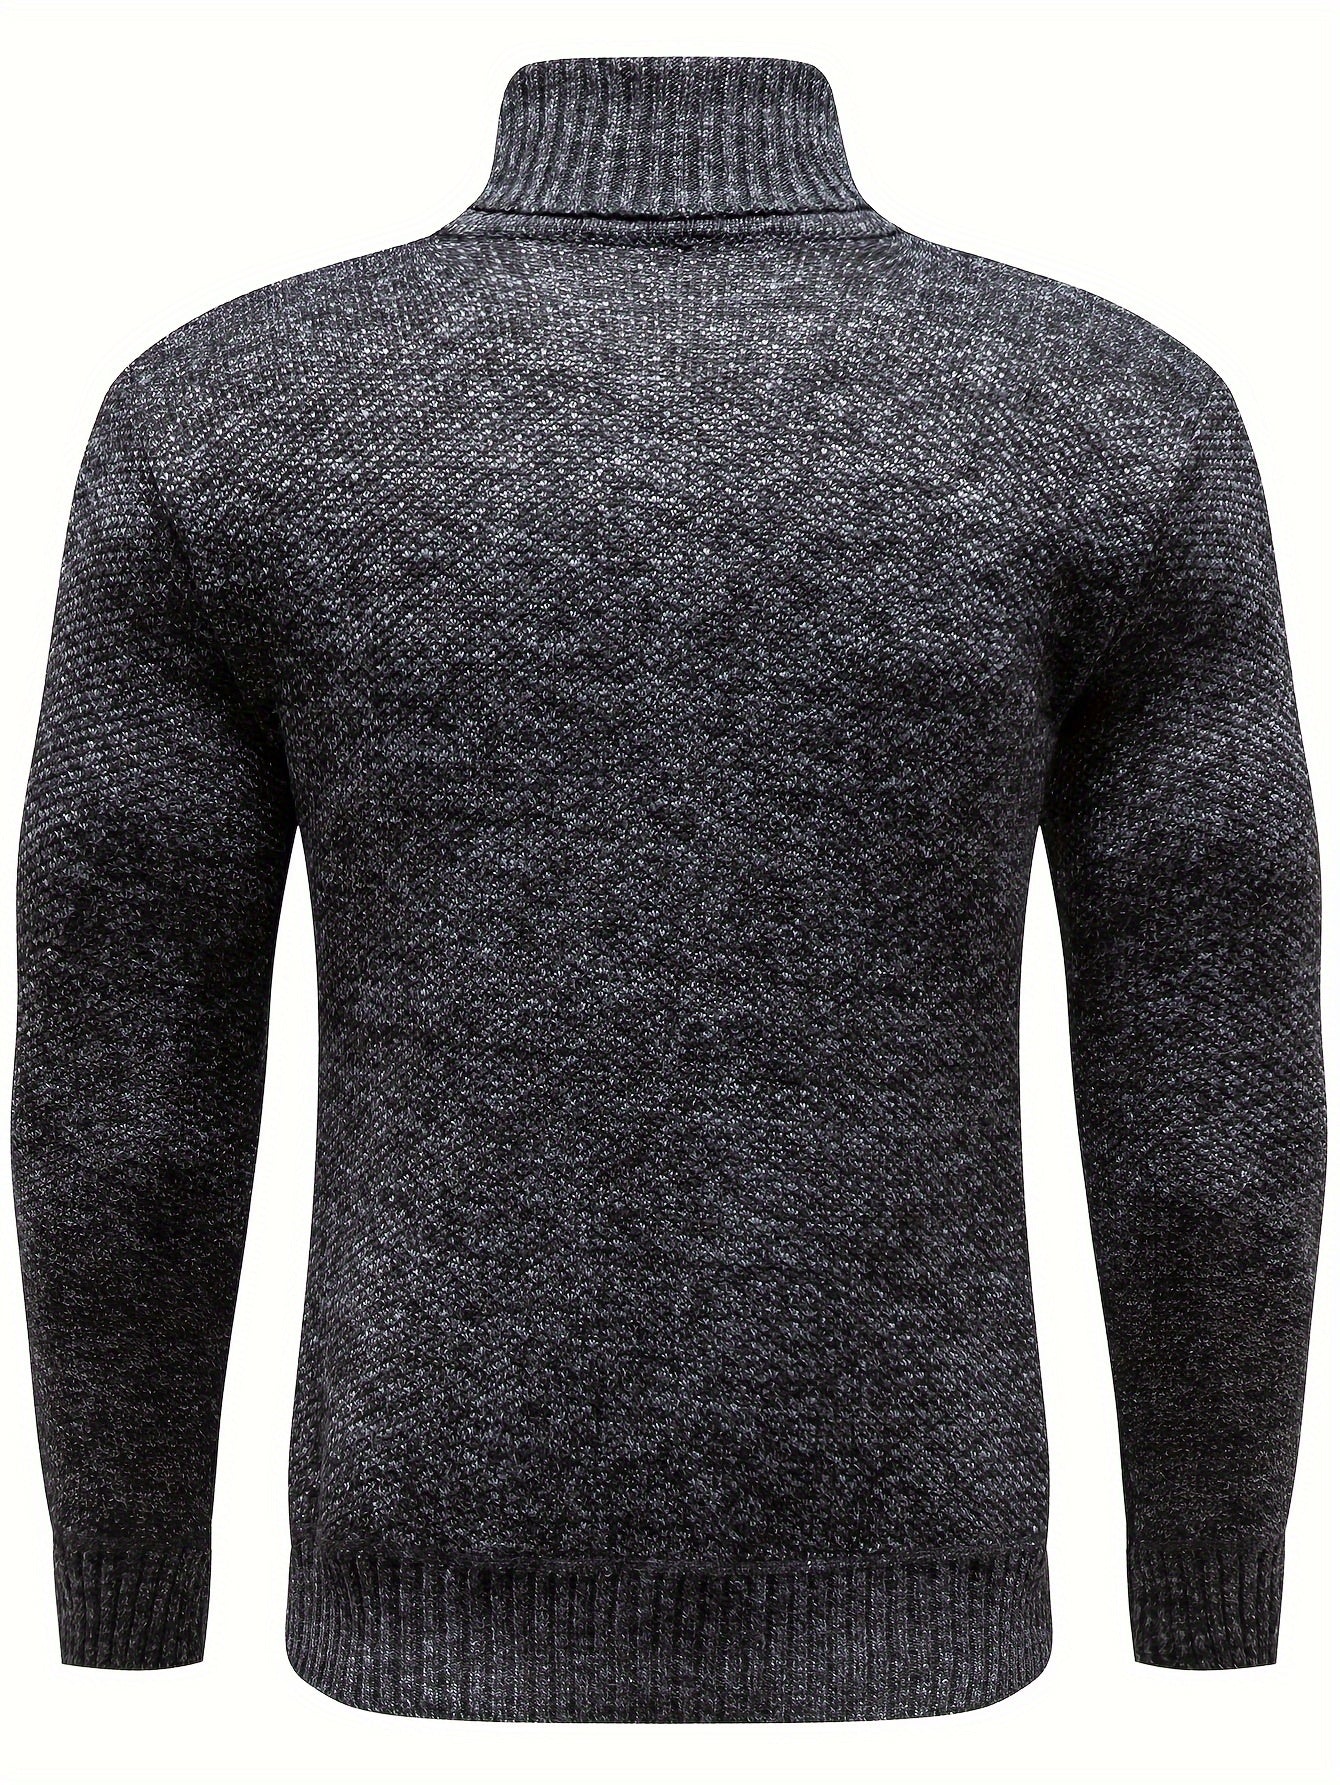 Turtle Neck Knitted Solid Sweater, Men's Casual Warm Slightly Stretch Pullover Sweater For Fall Winter